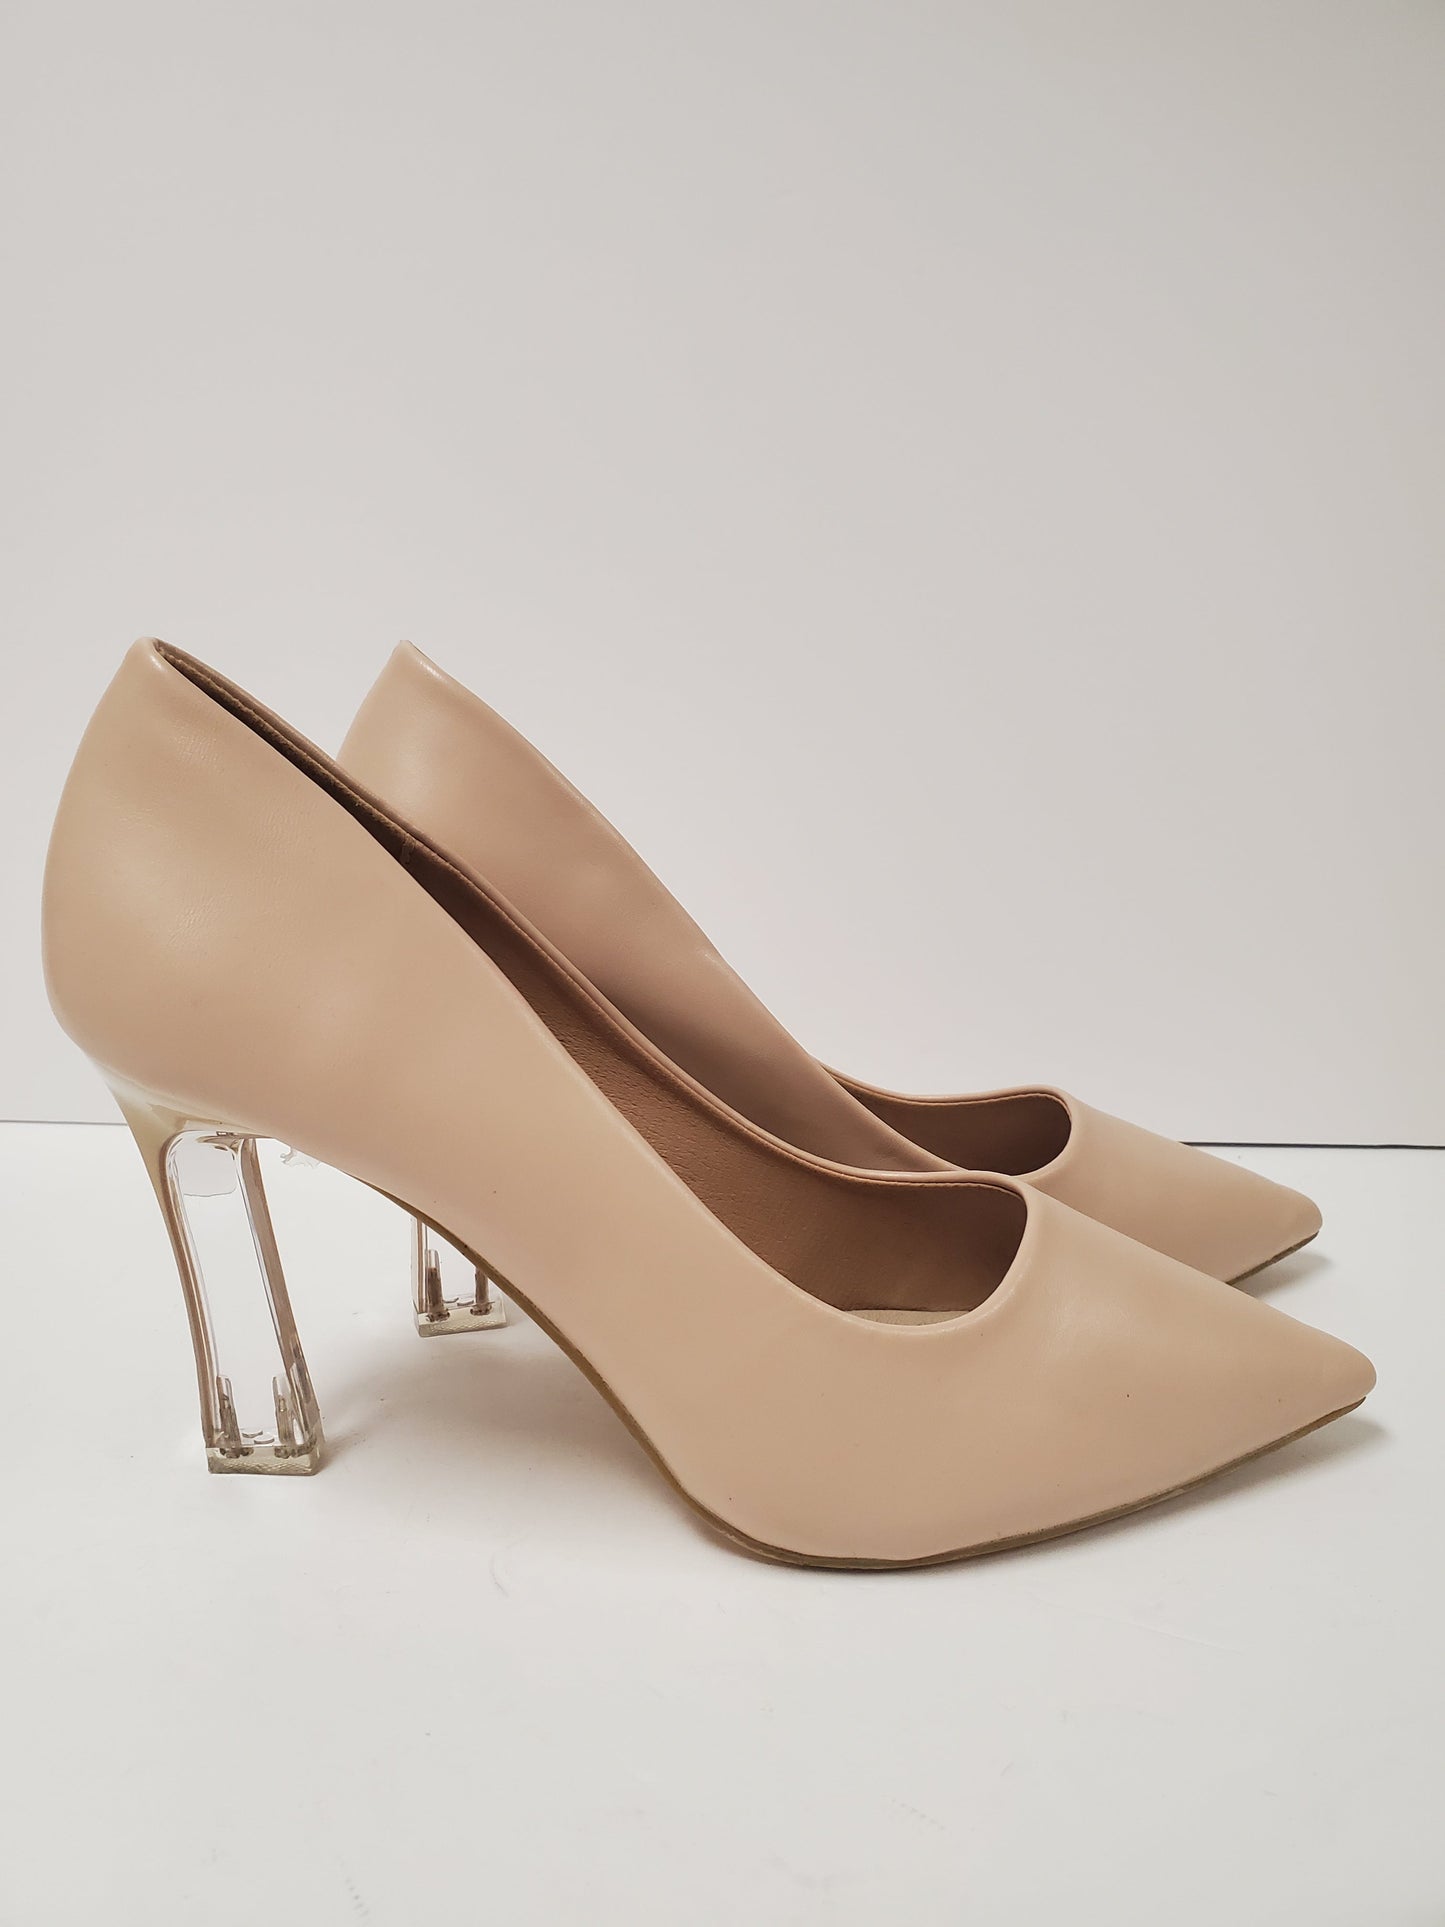 Shoes Heels Stiletto By Shein  Size: 10